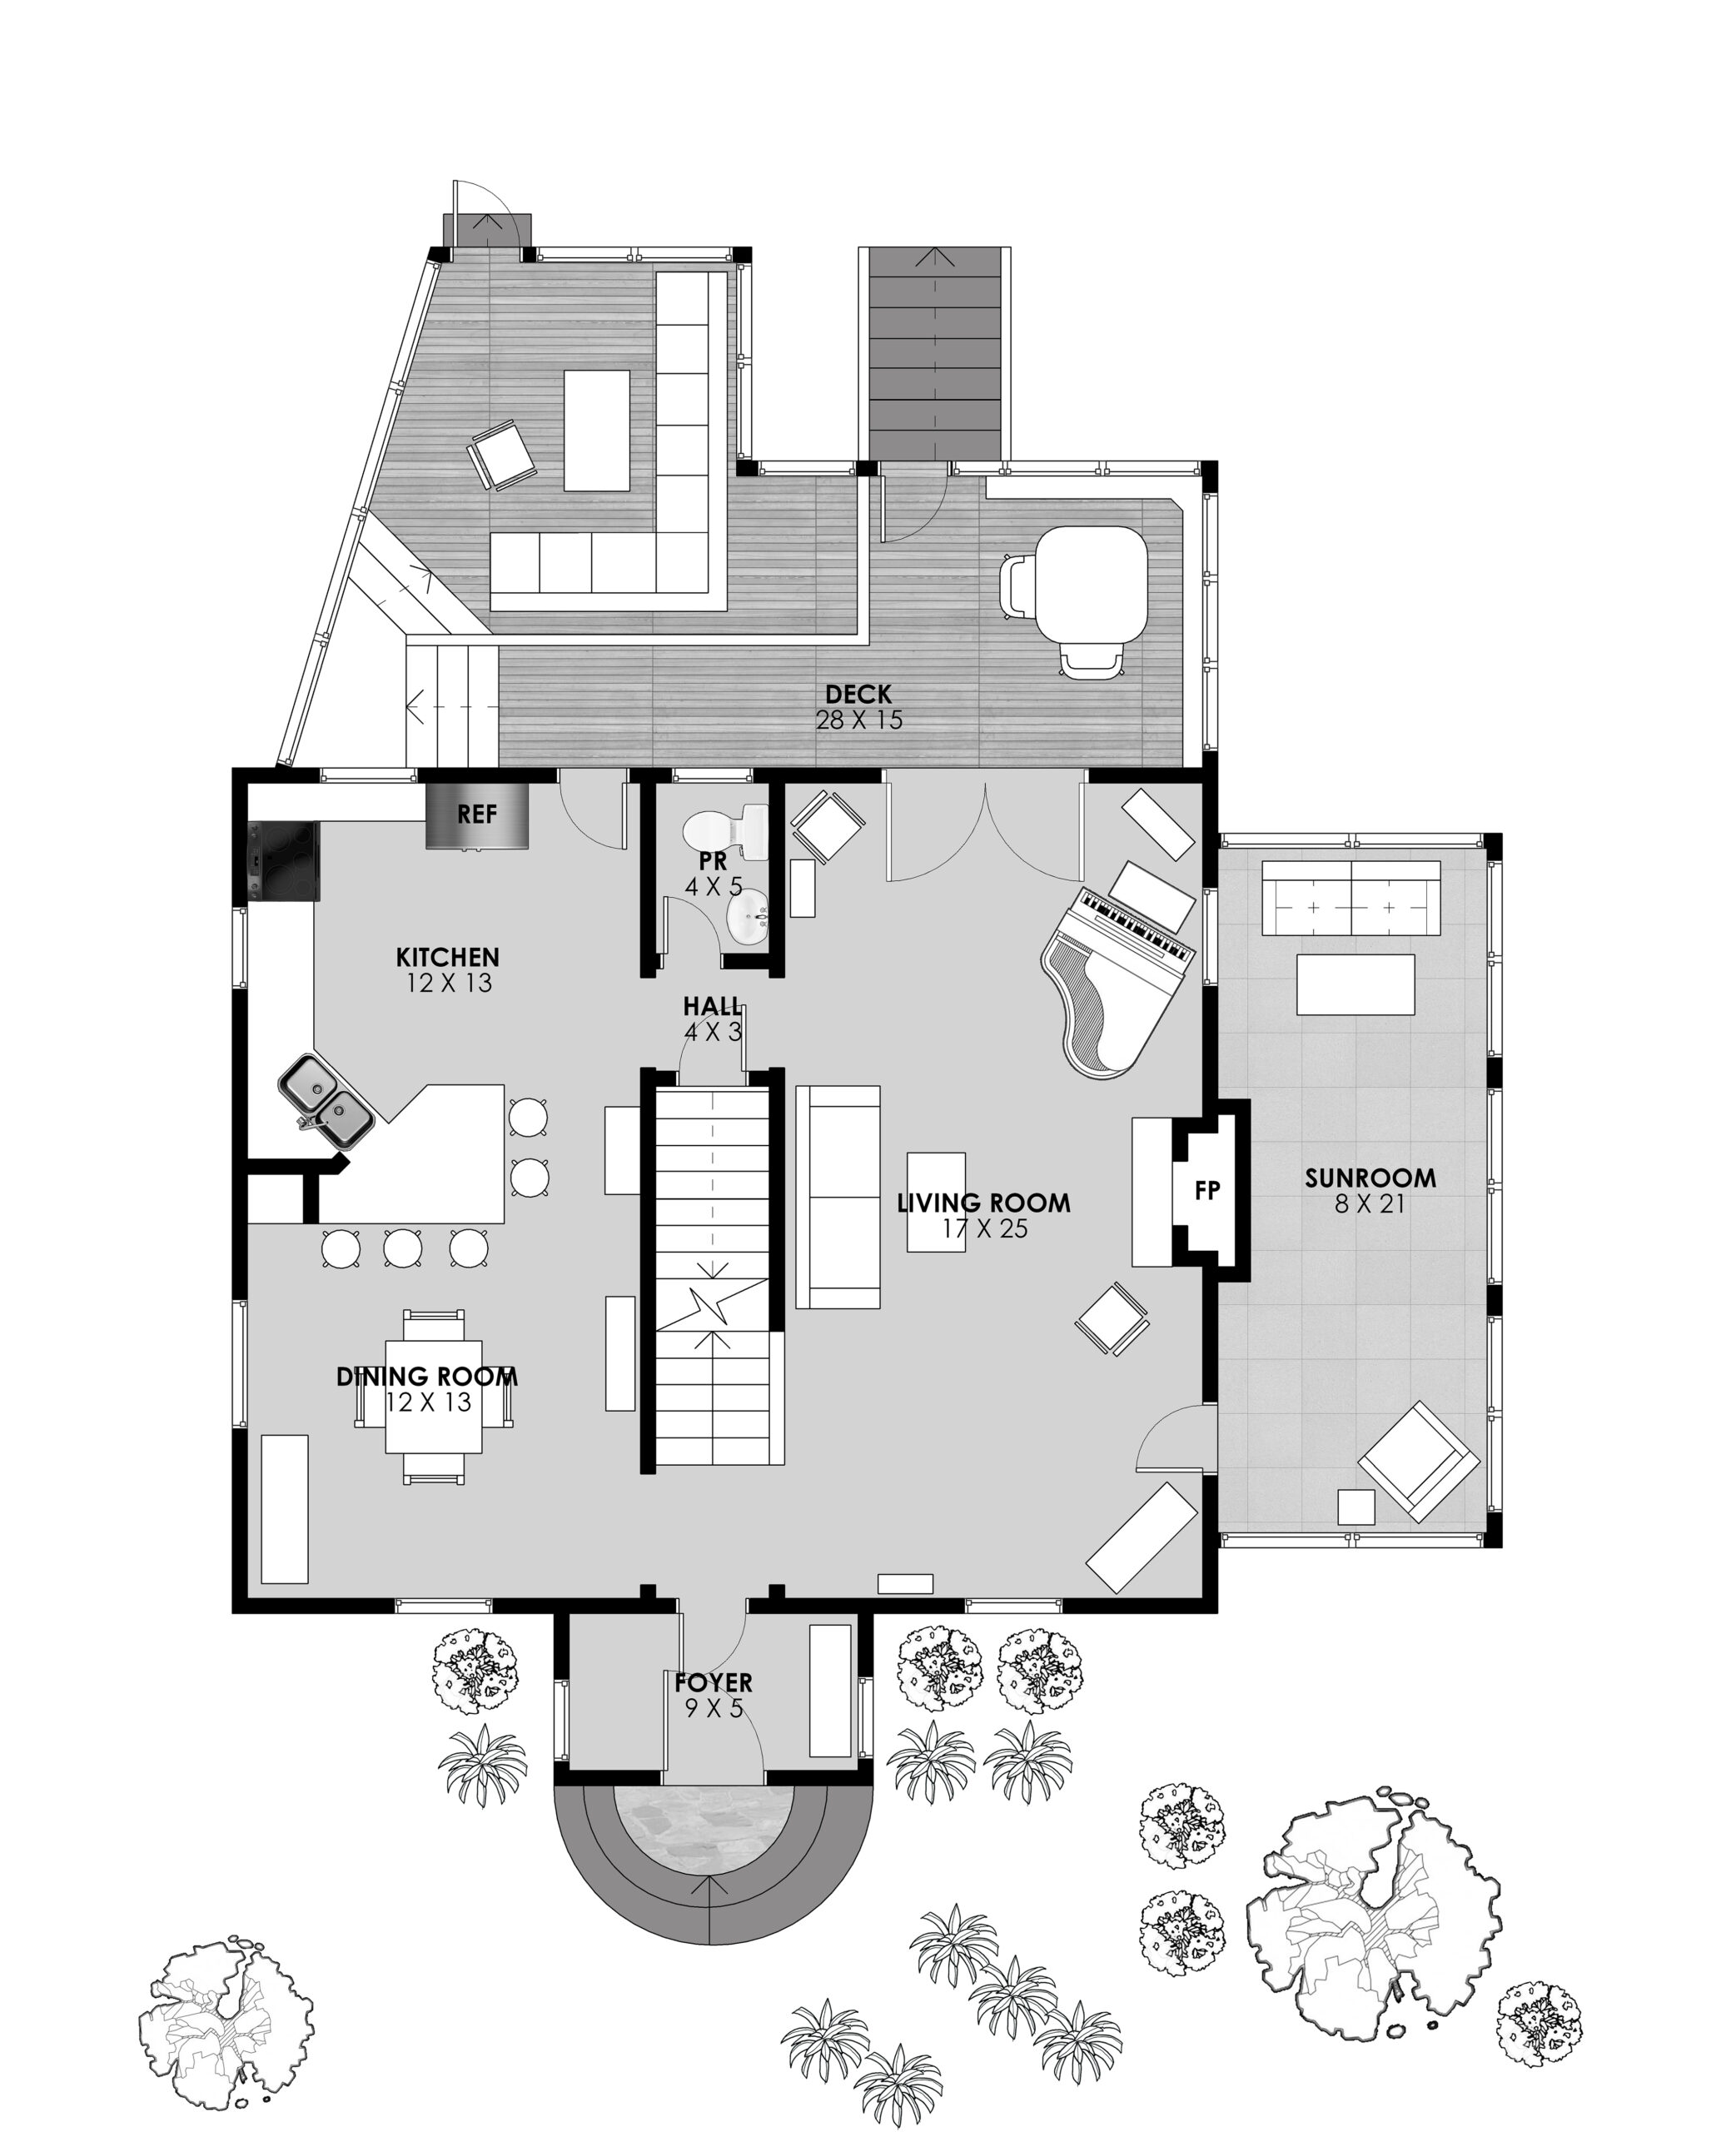 High detail floor plan of the main level of 15 N Fenwick Street showing all interior and exterior detailing including landscaping and multi-level decks